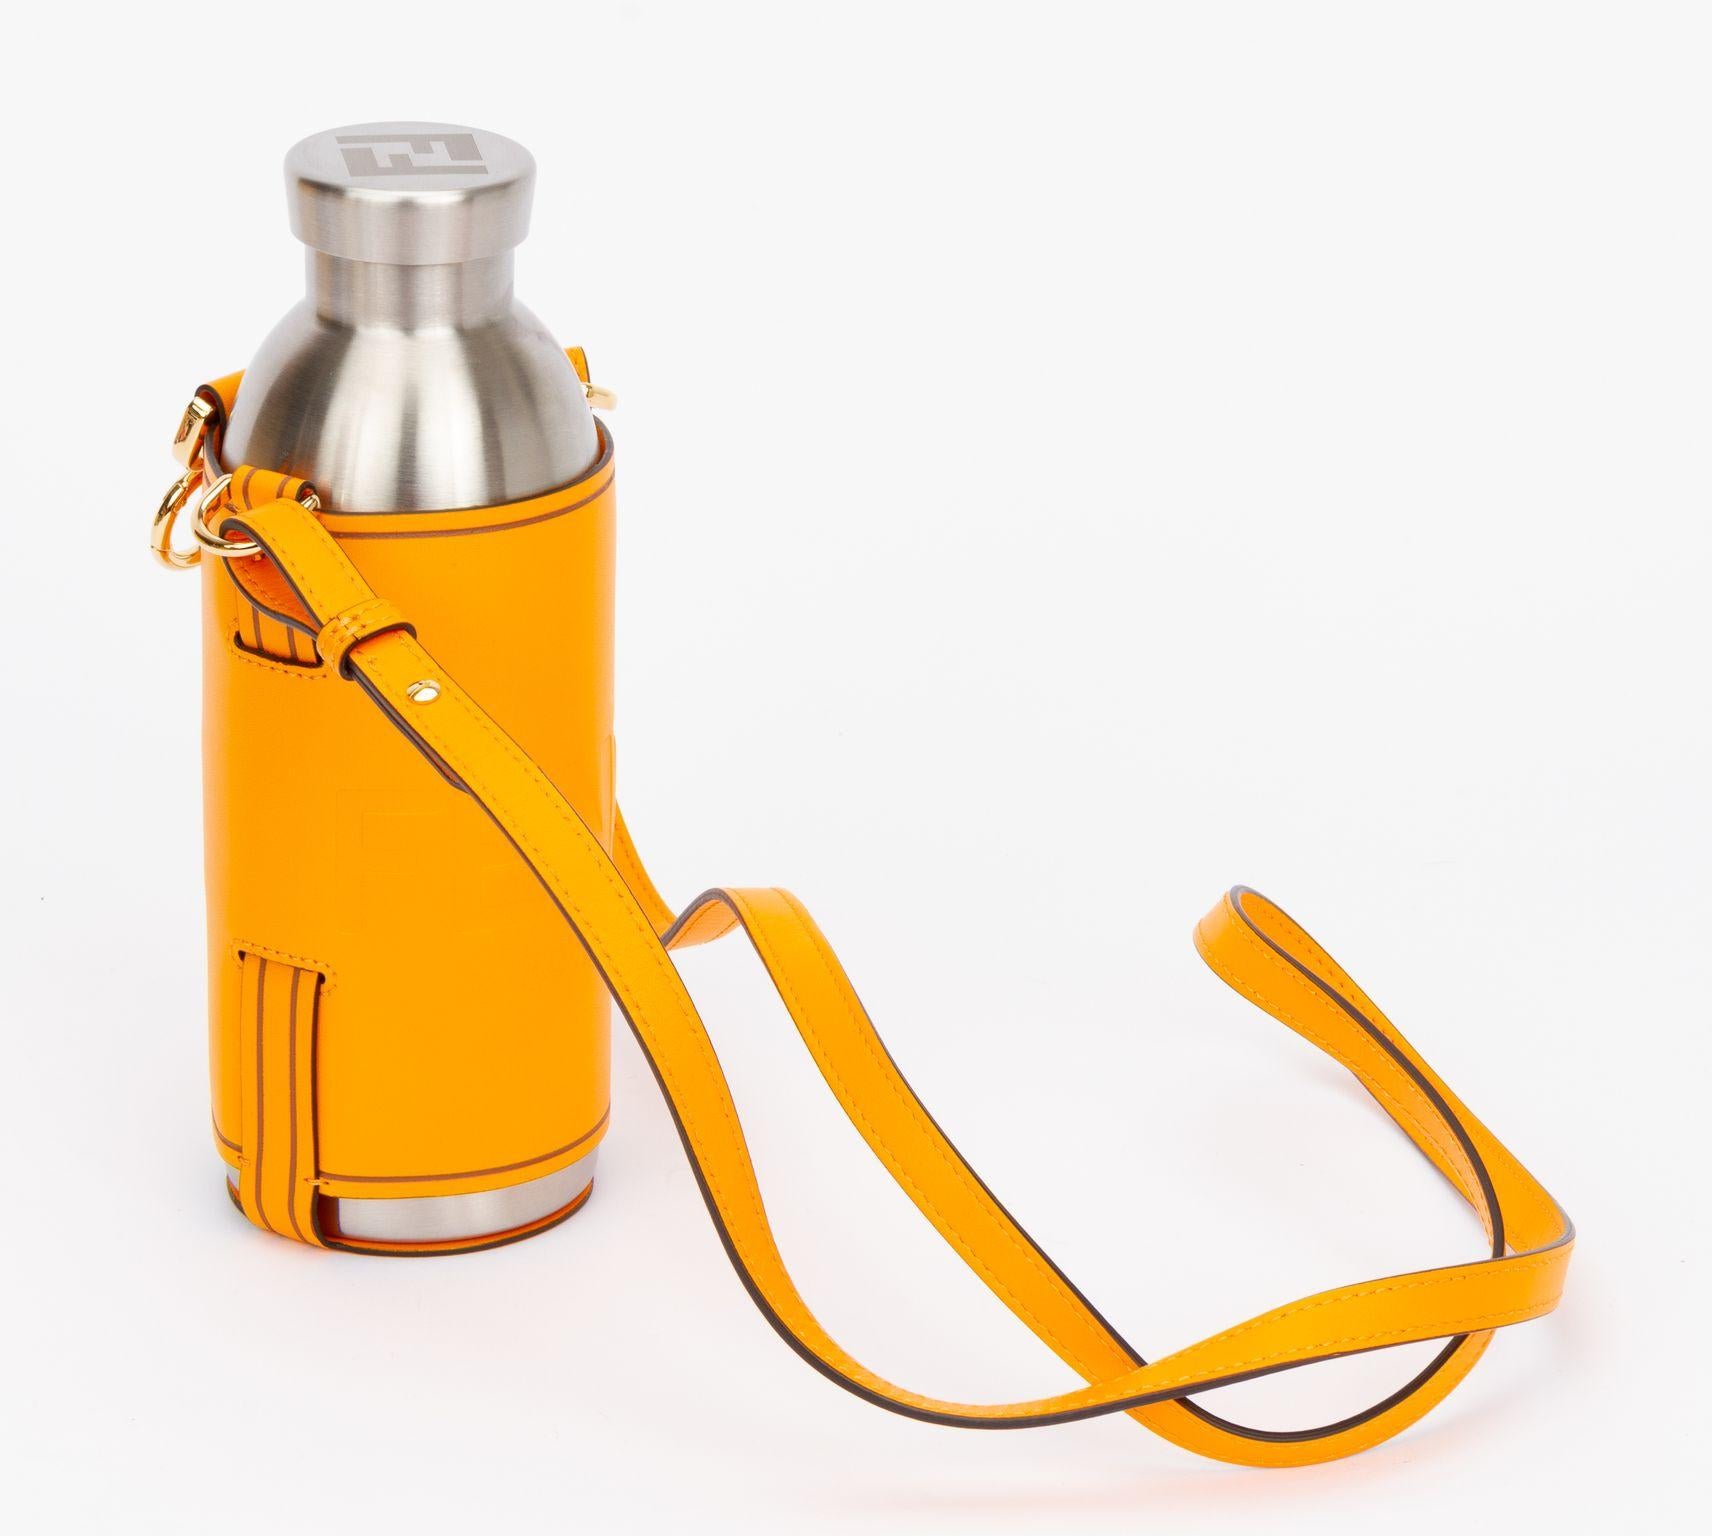 Fendi bottle holder made of calfskin leather in clementine. The piece comes with an adjustable and detachable shoulder strap (drop 21.5